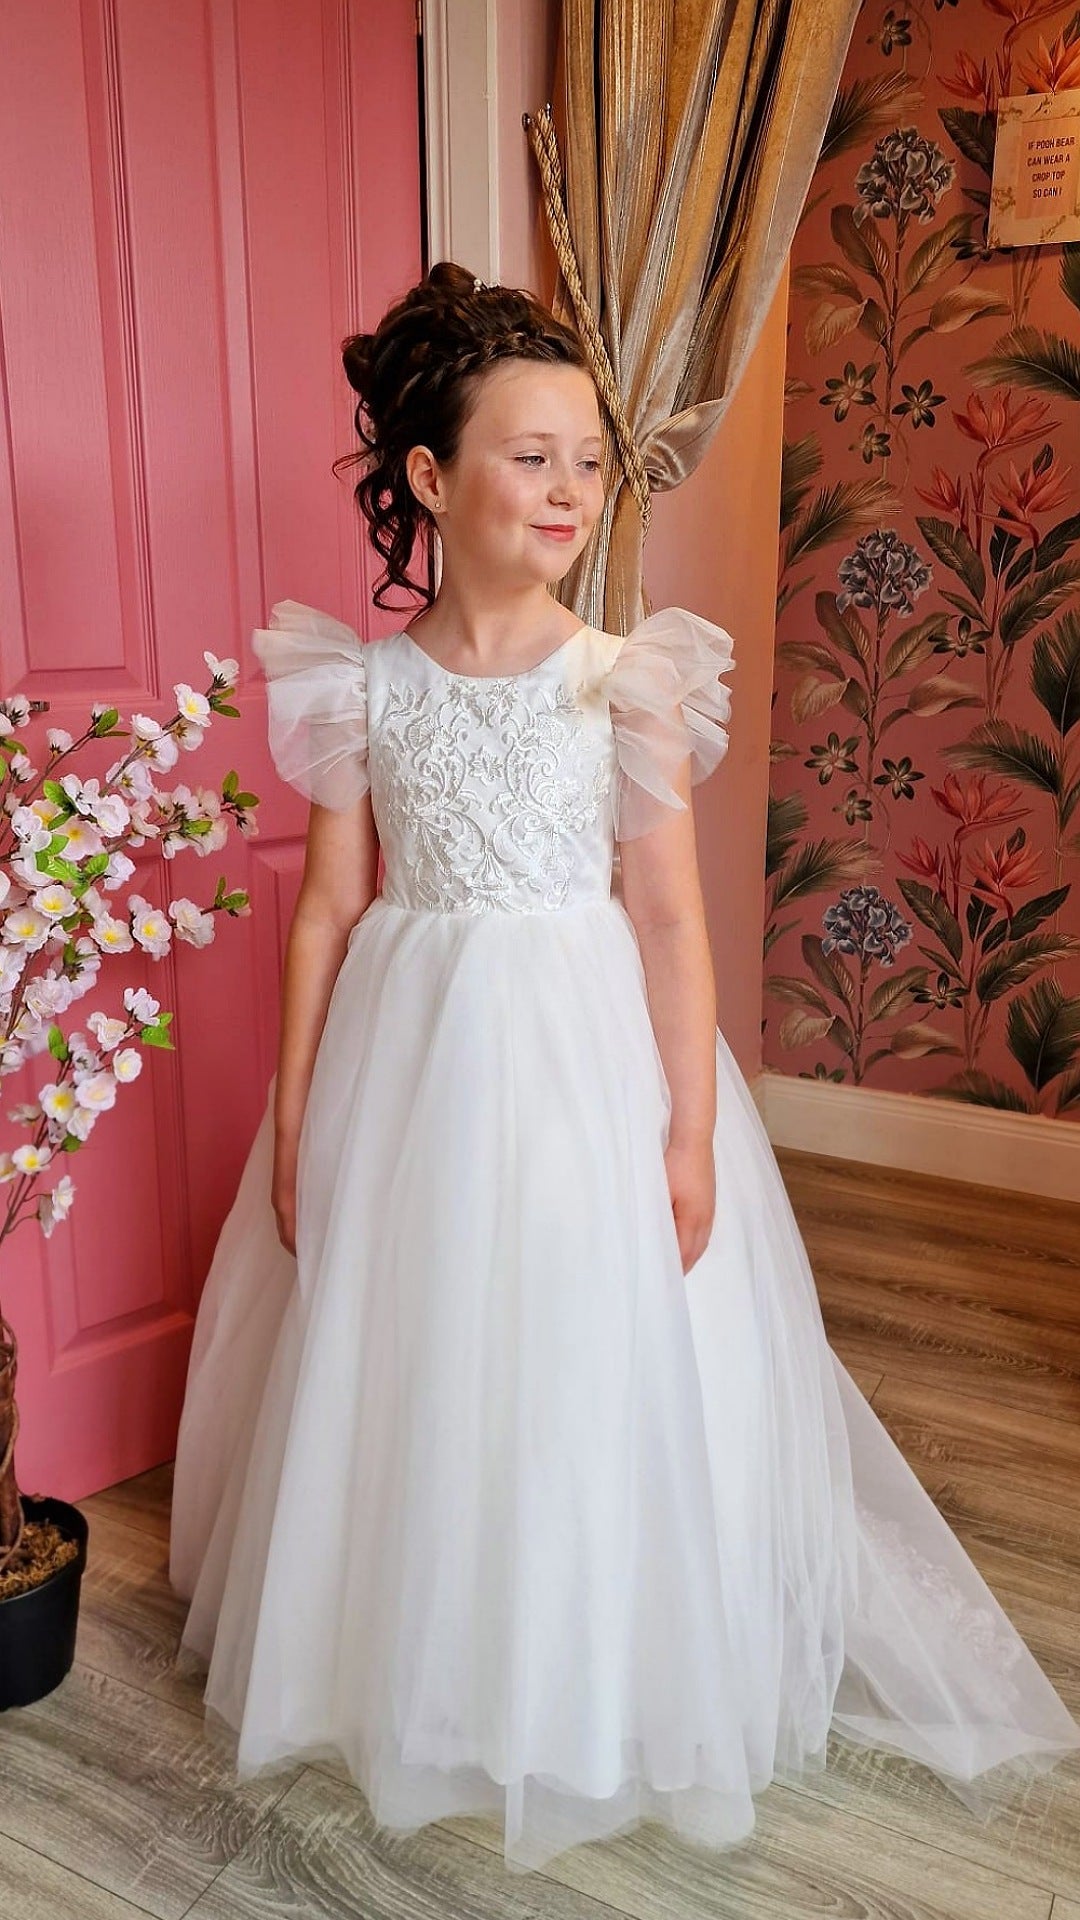 Emilia Flower Girl Dress With Bow At Back